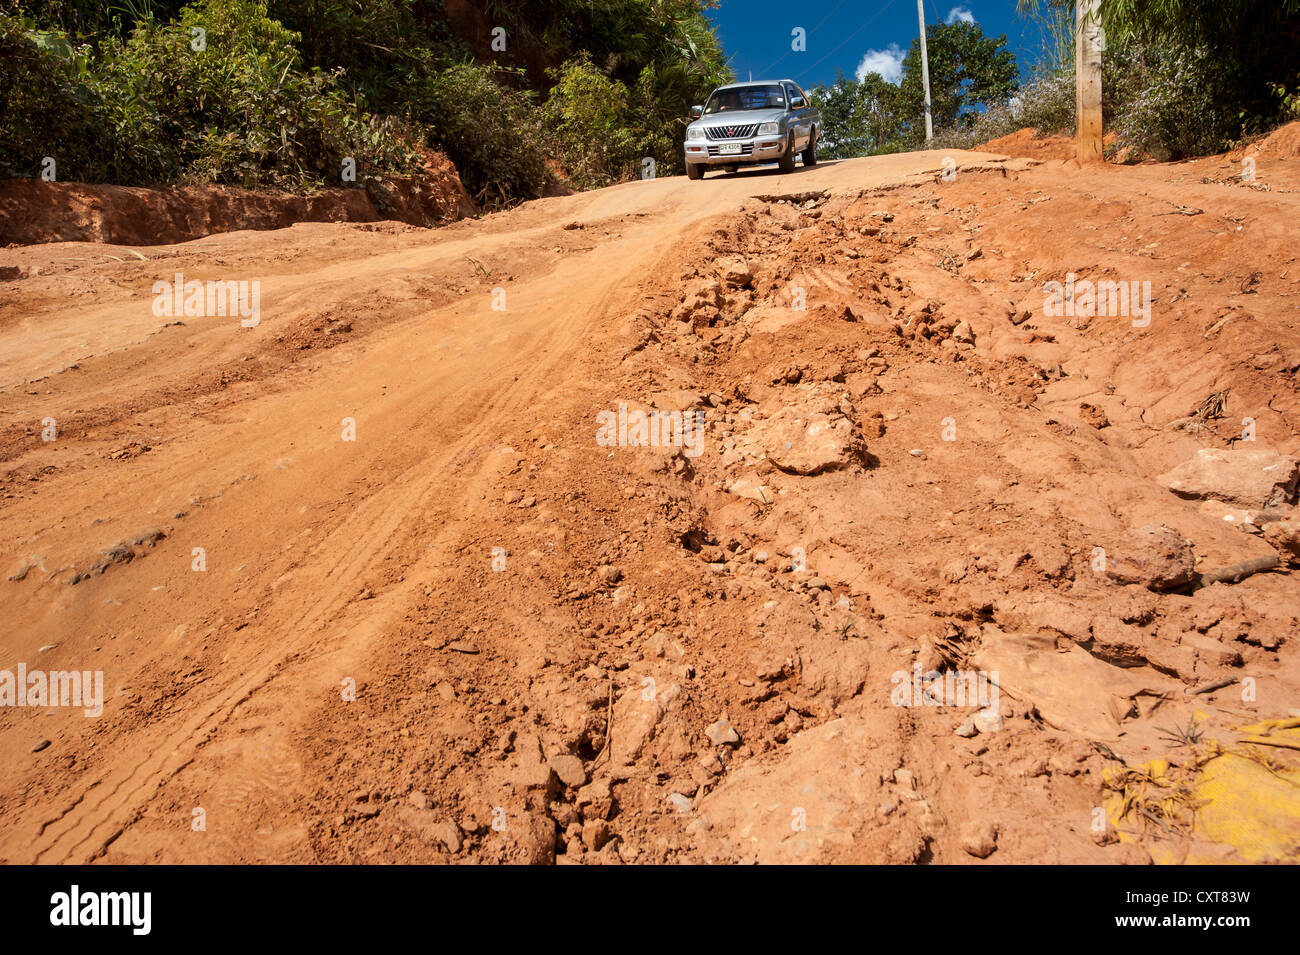 SUV or off-road vehicle at the end of a paved road, dirt road, Northern Thailand, Thailand, Asia Stock Photo